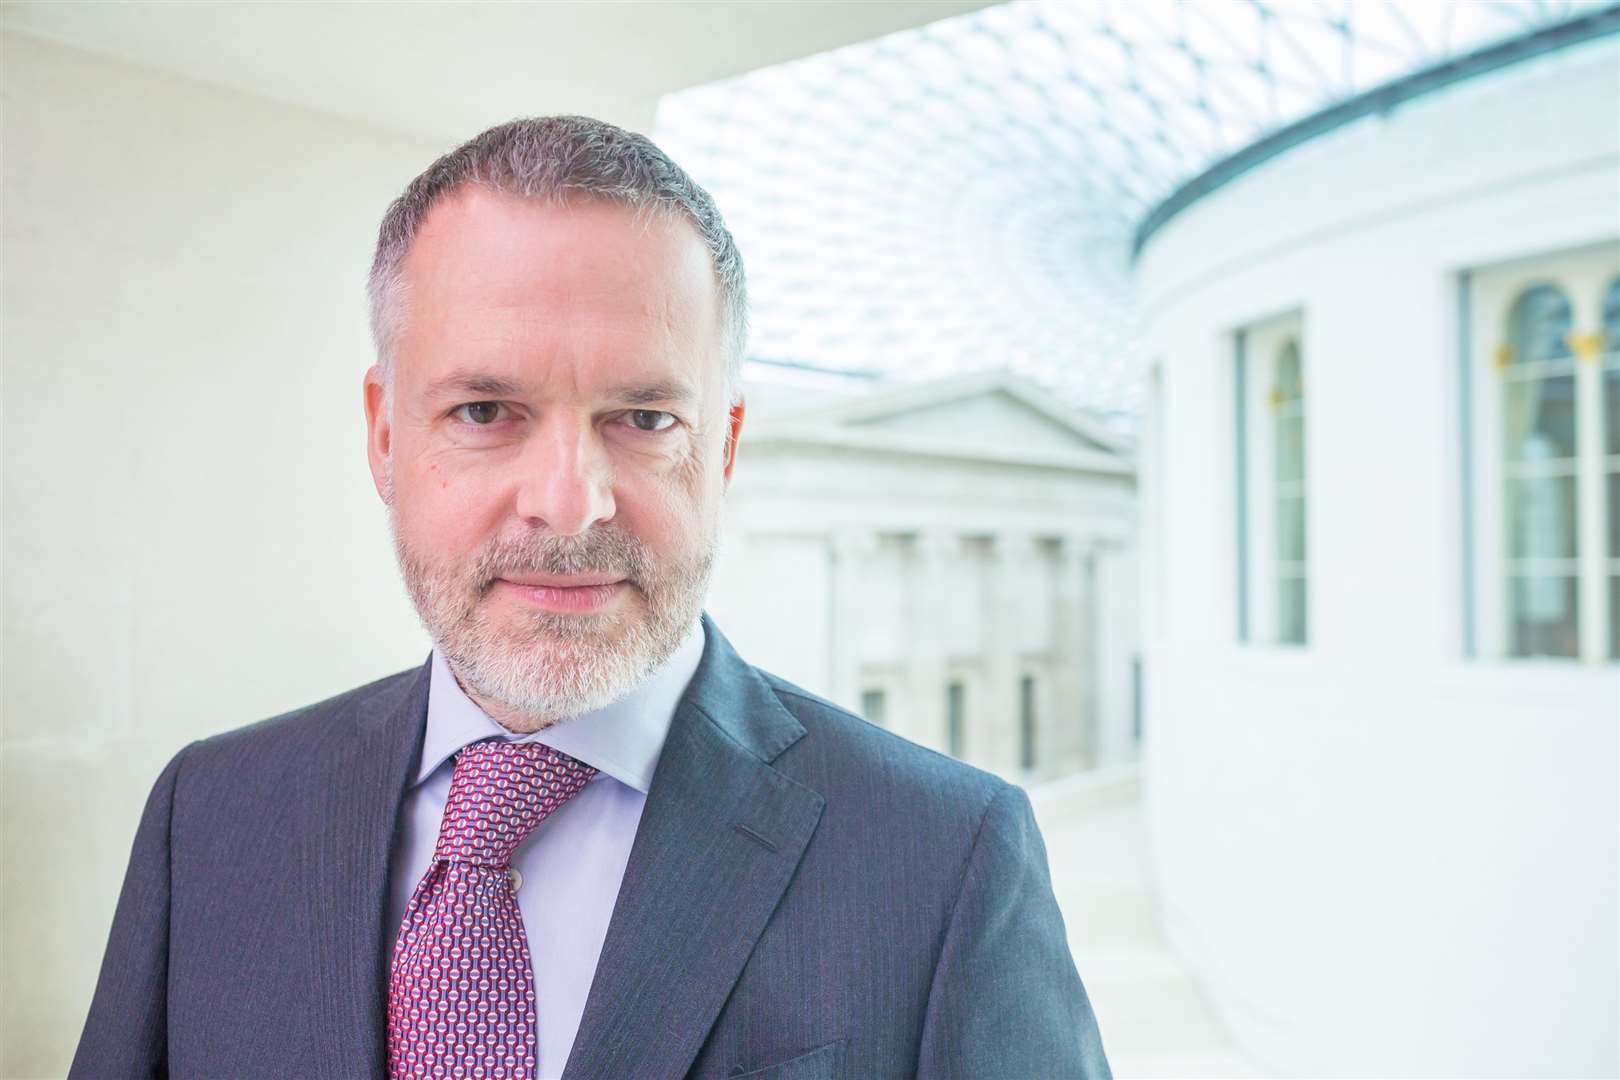 Hartwig Fischer will step down as director of the British Museum next year (Benedict Johnson/The British Museum/PA)